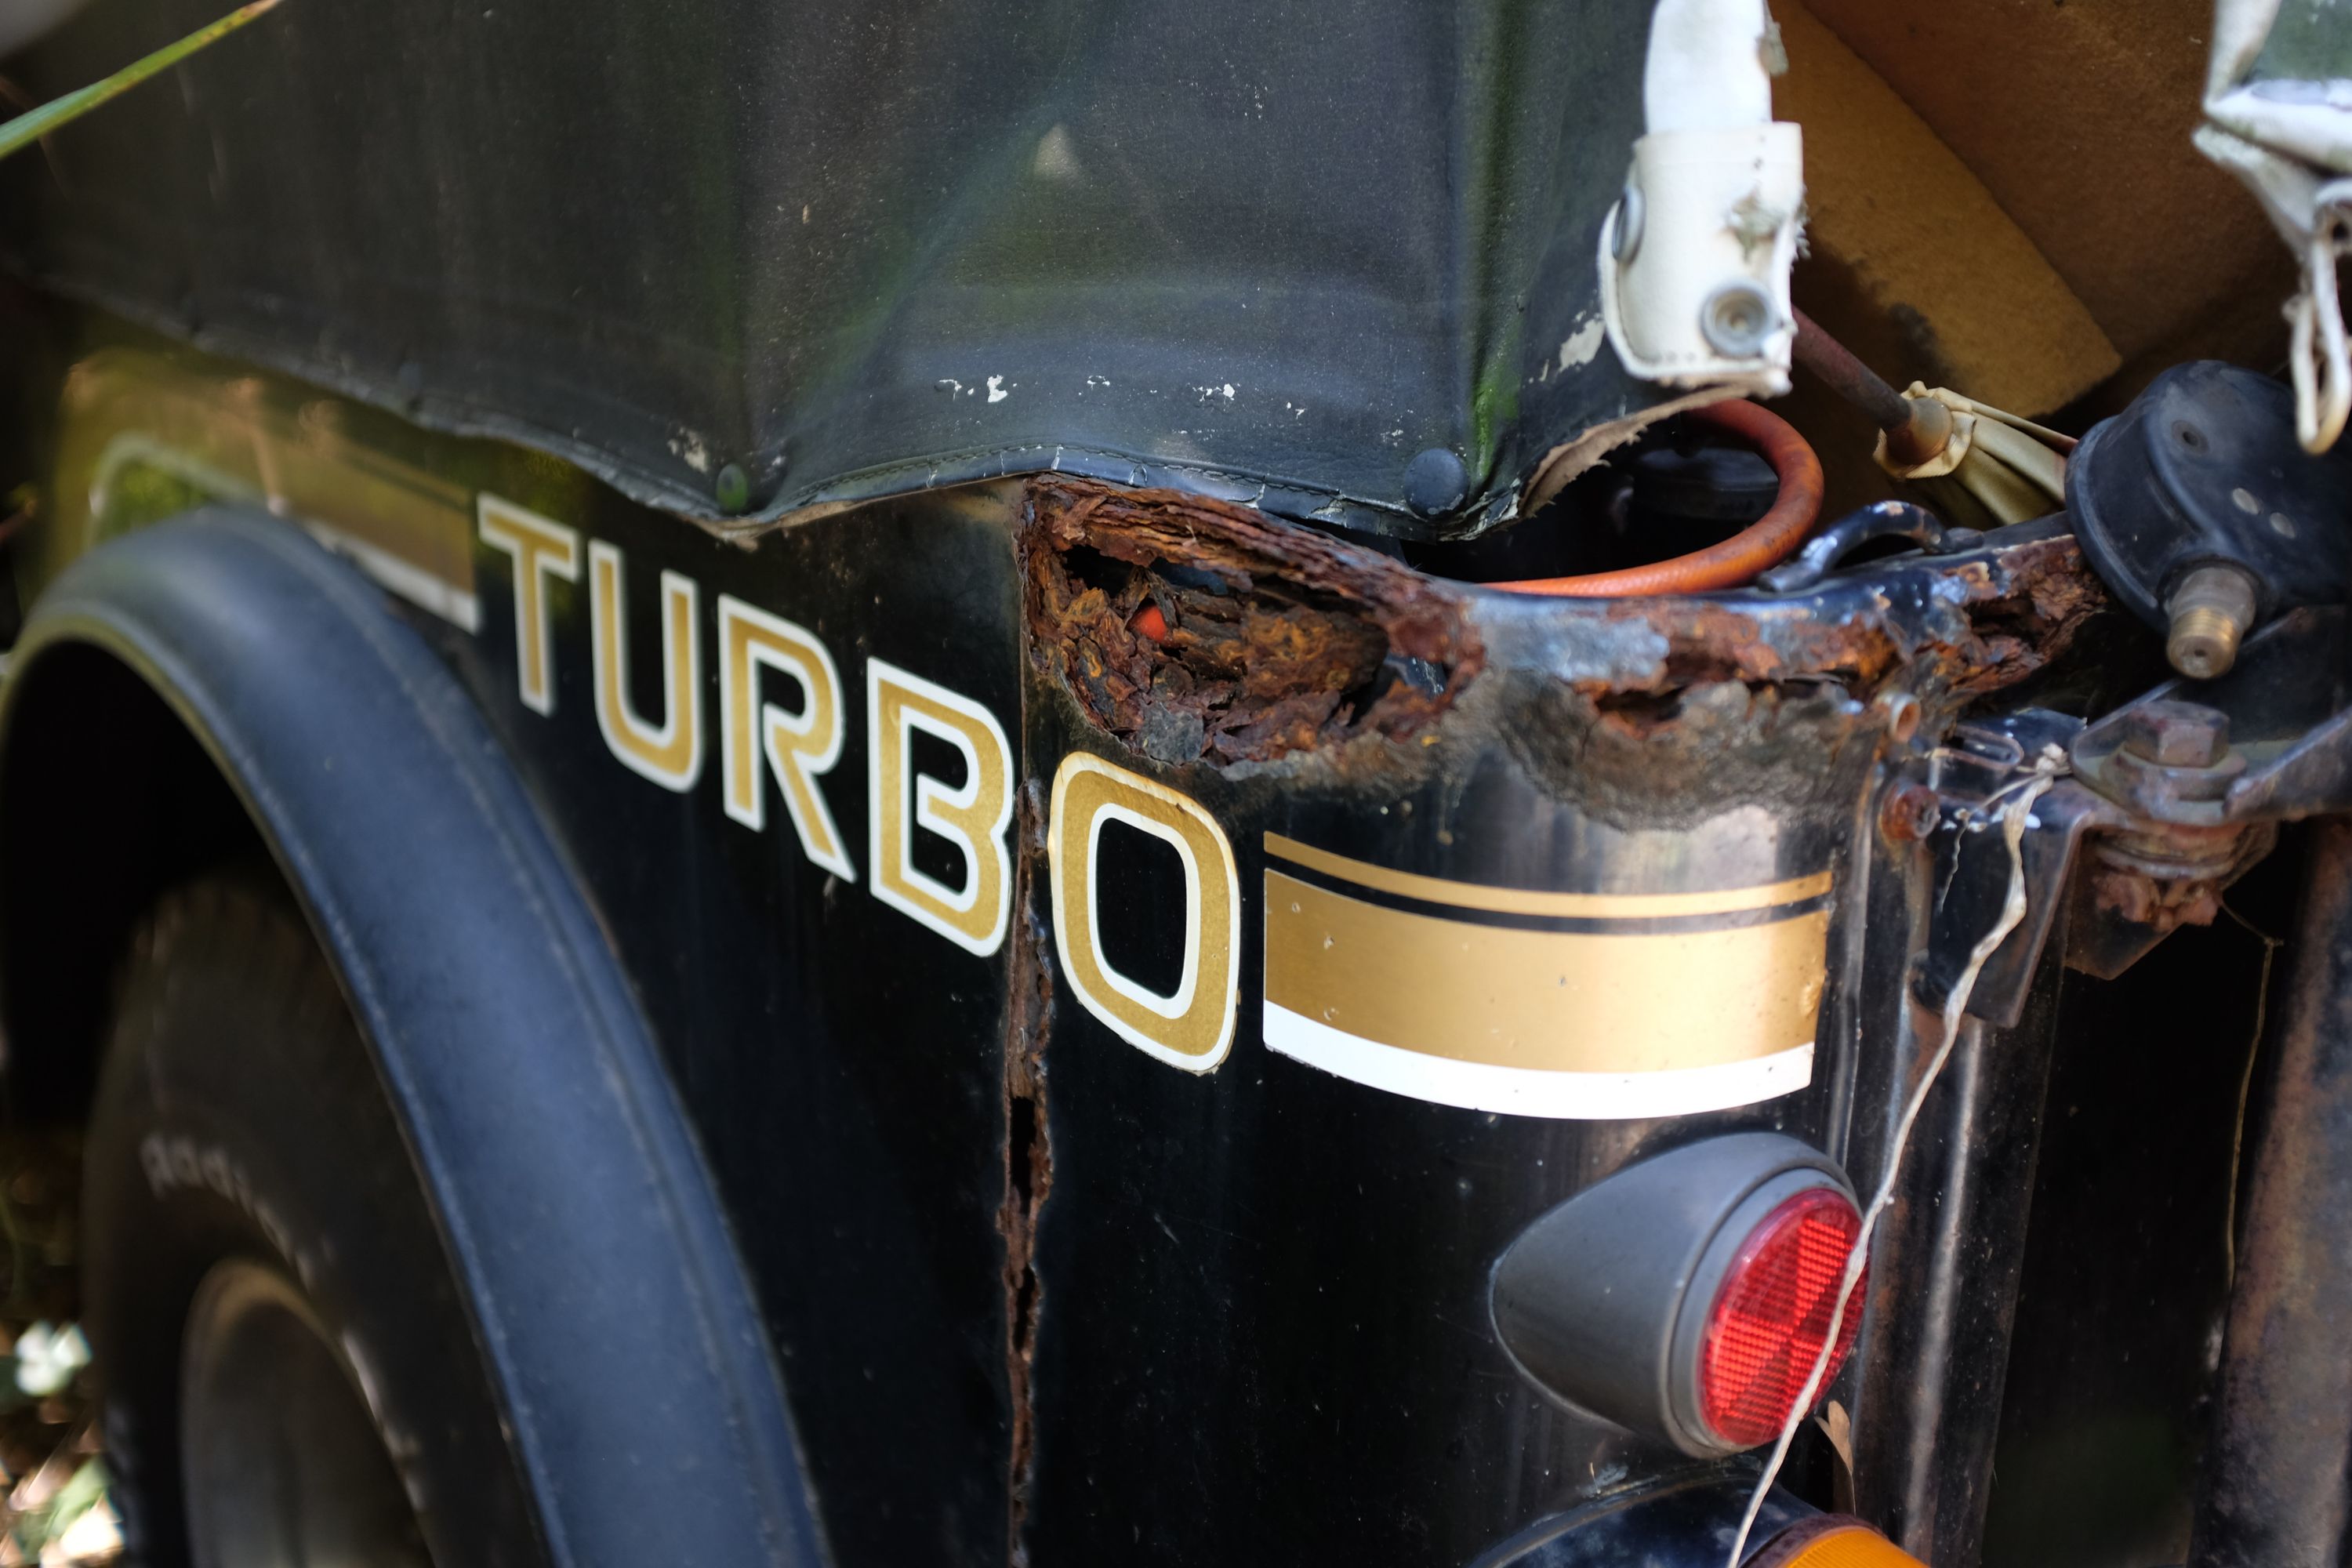 Detail of a rusty car with a sticker saying TURBO.